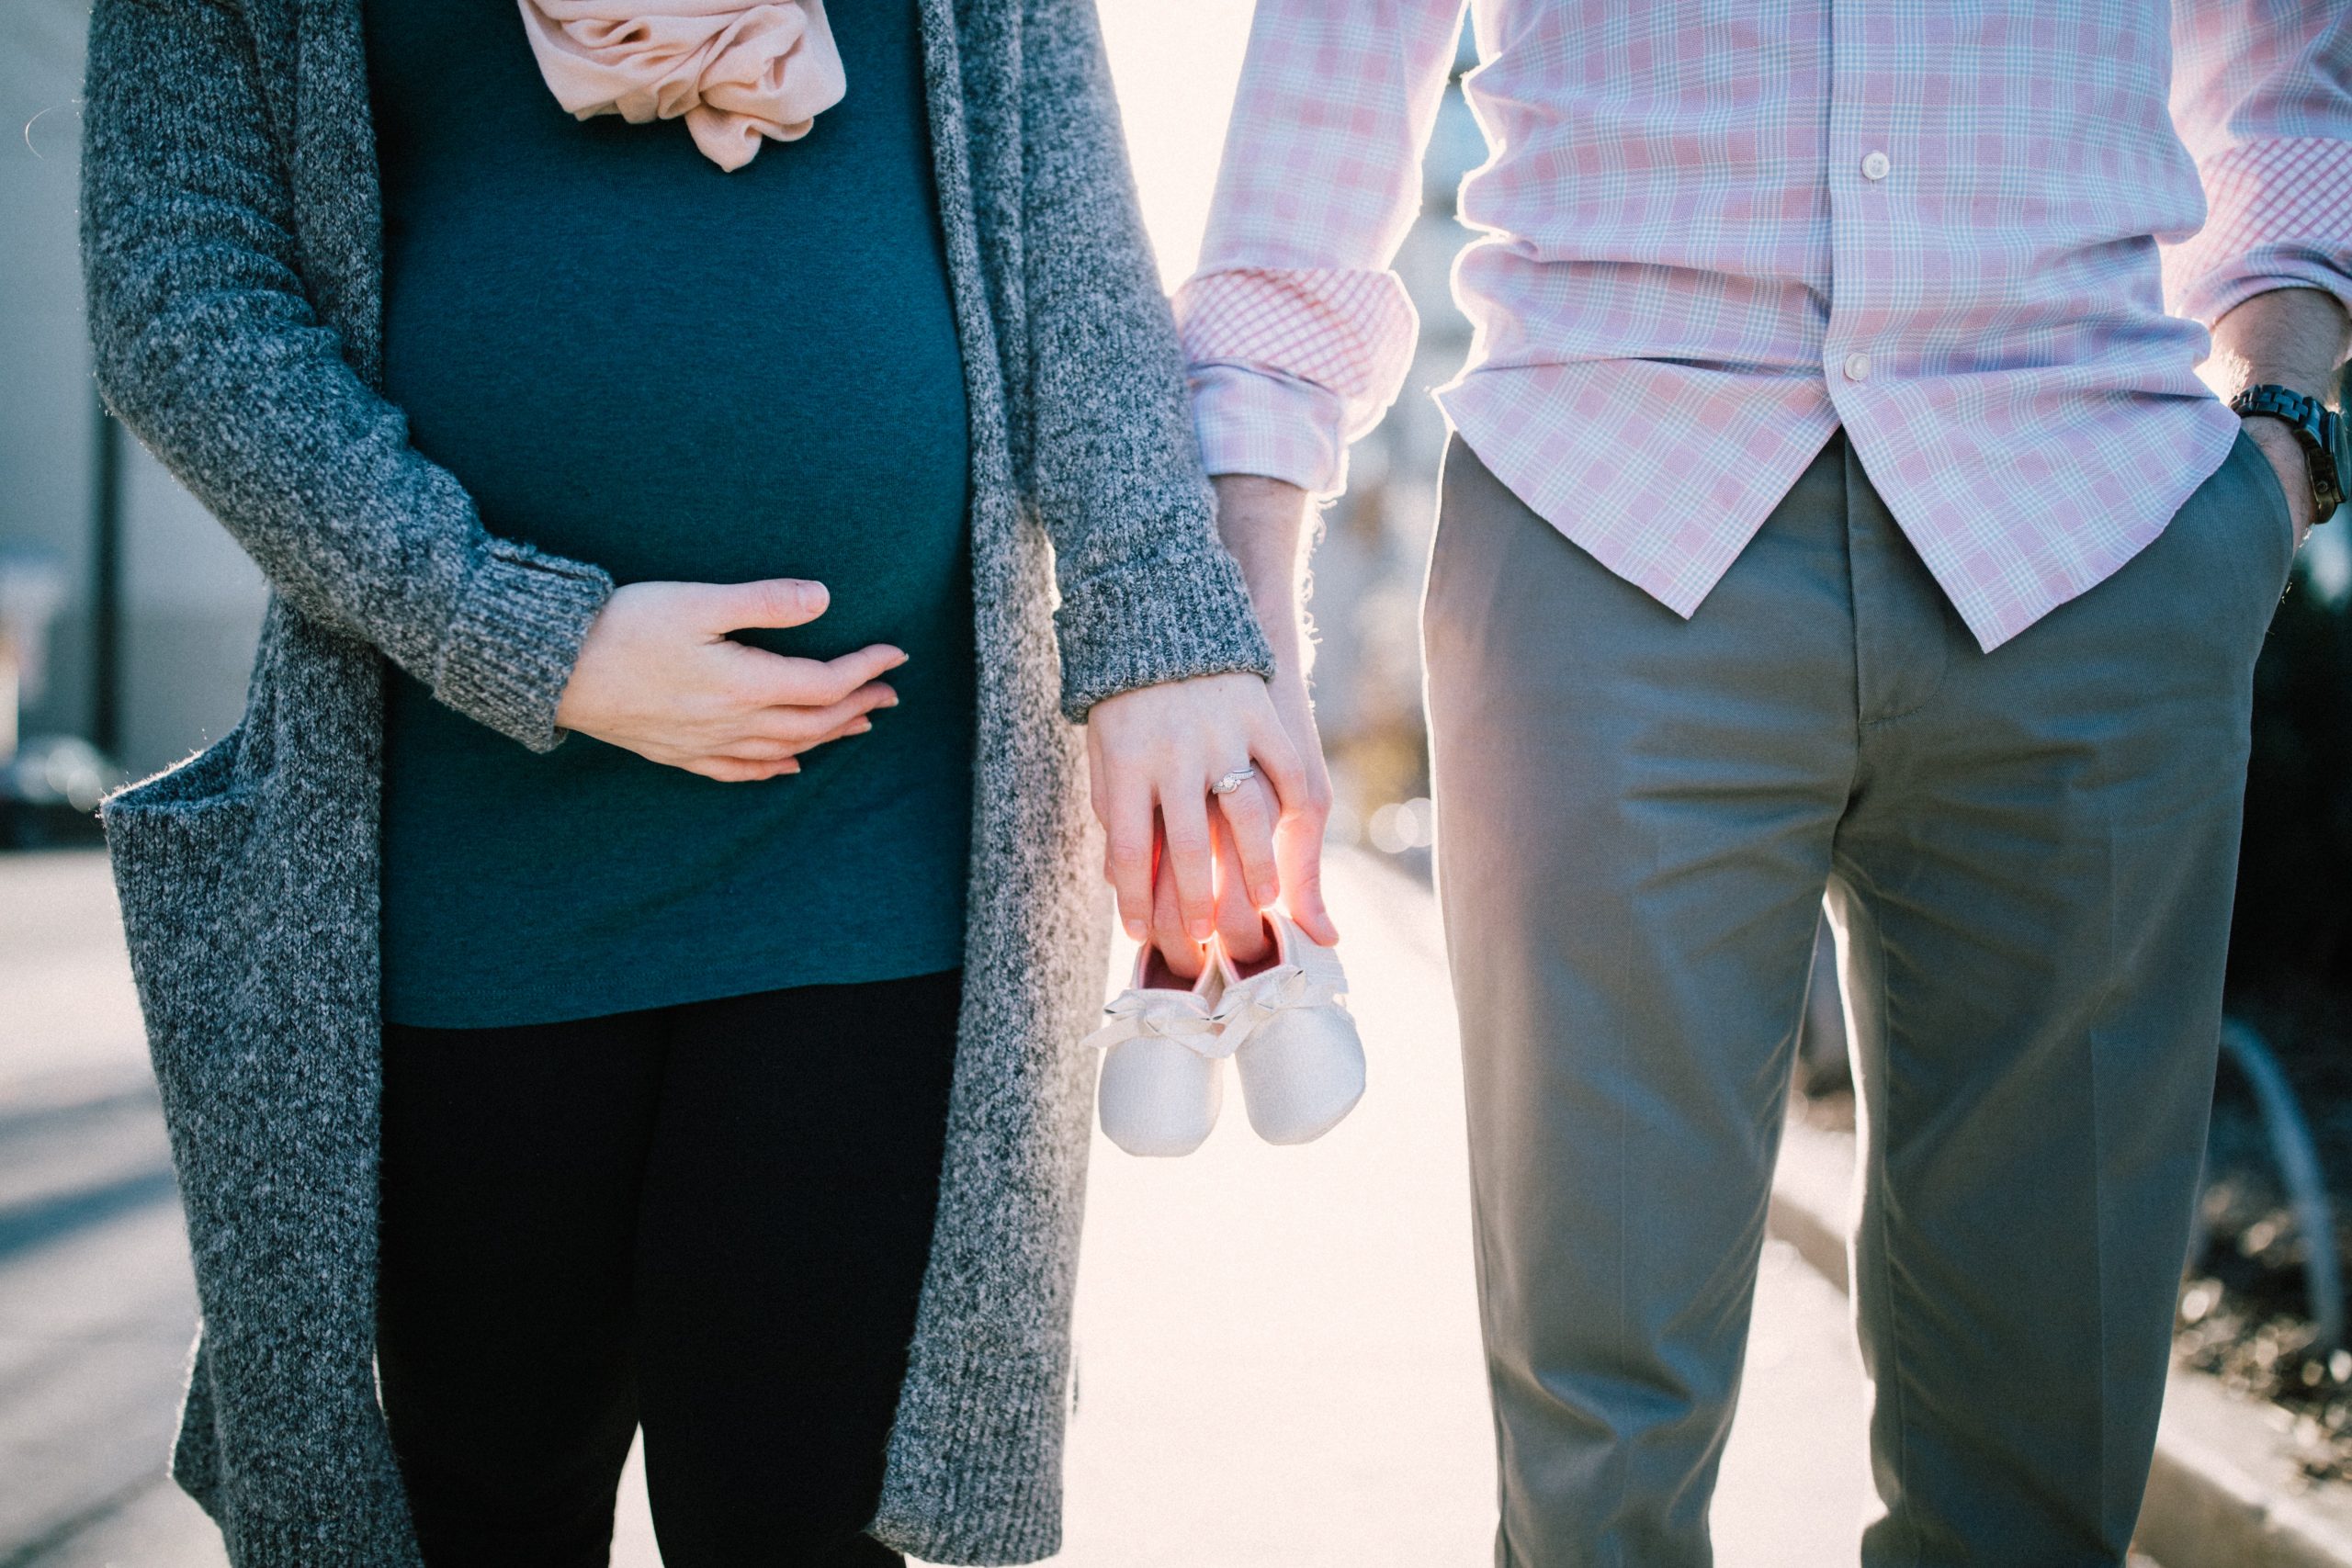 How does pregnancy affect mortgage applications?